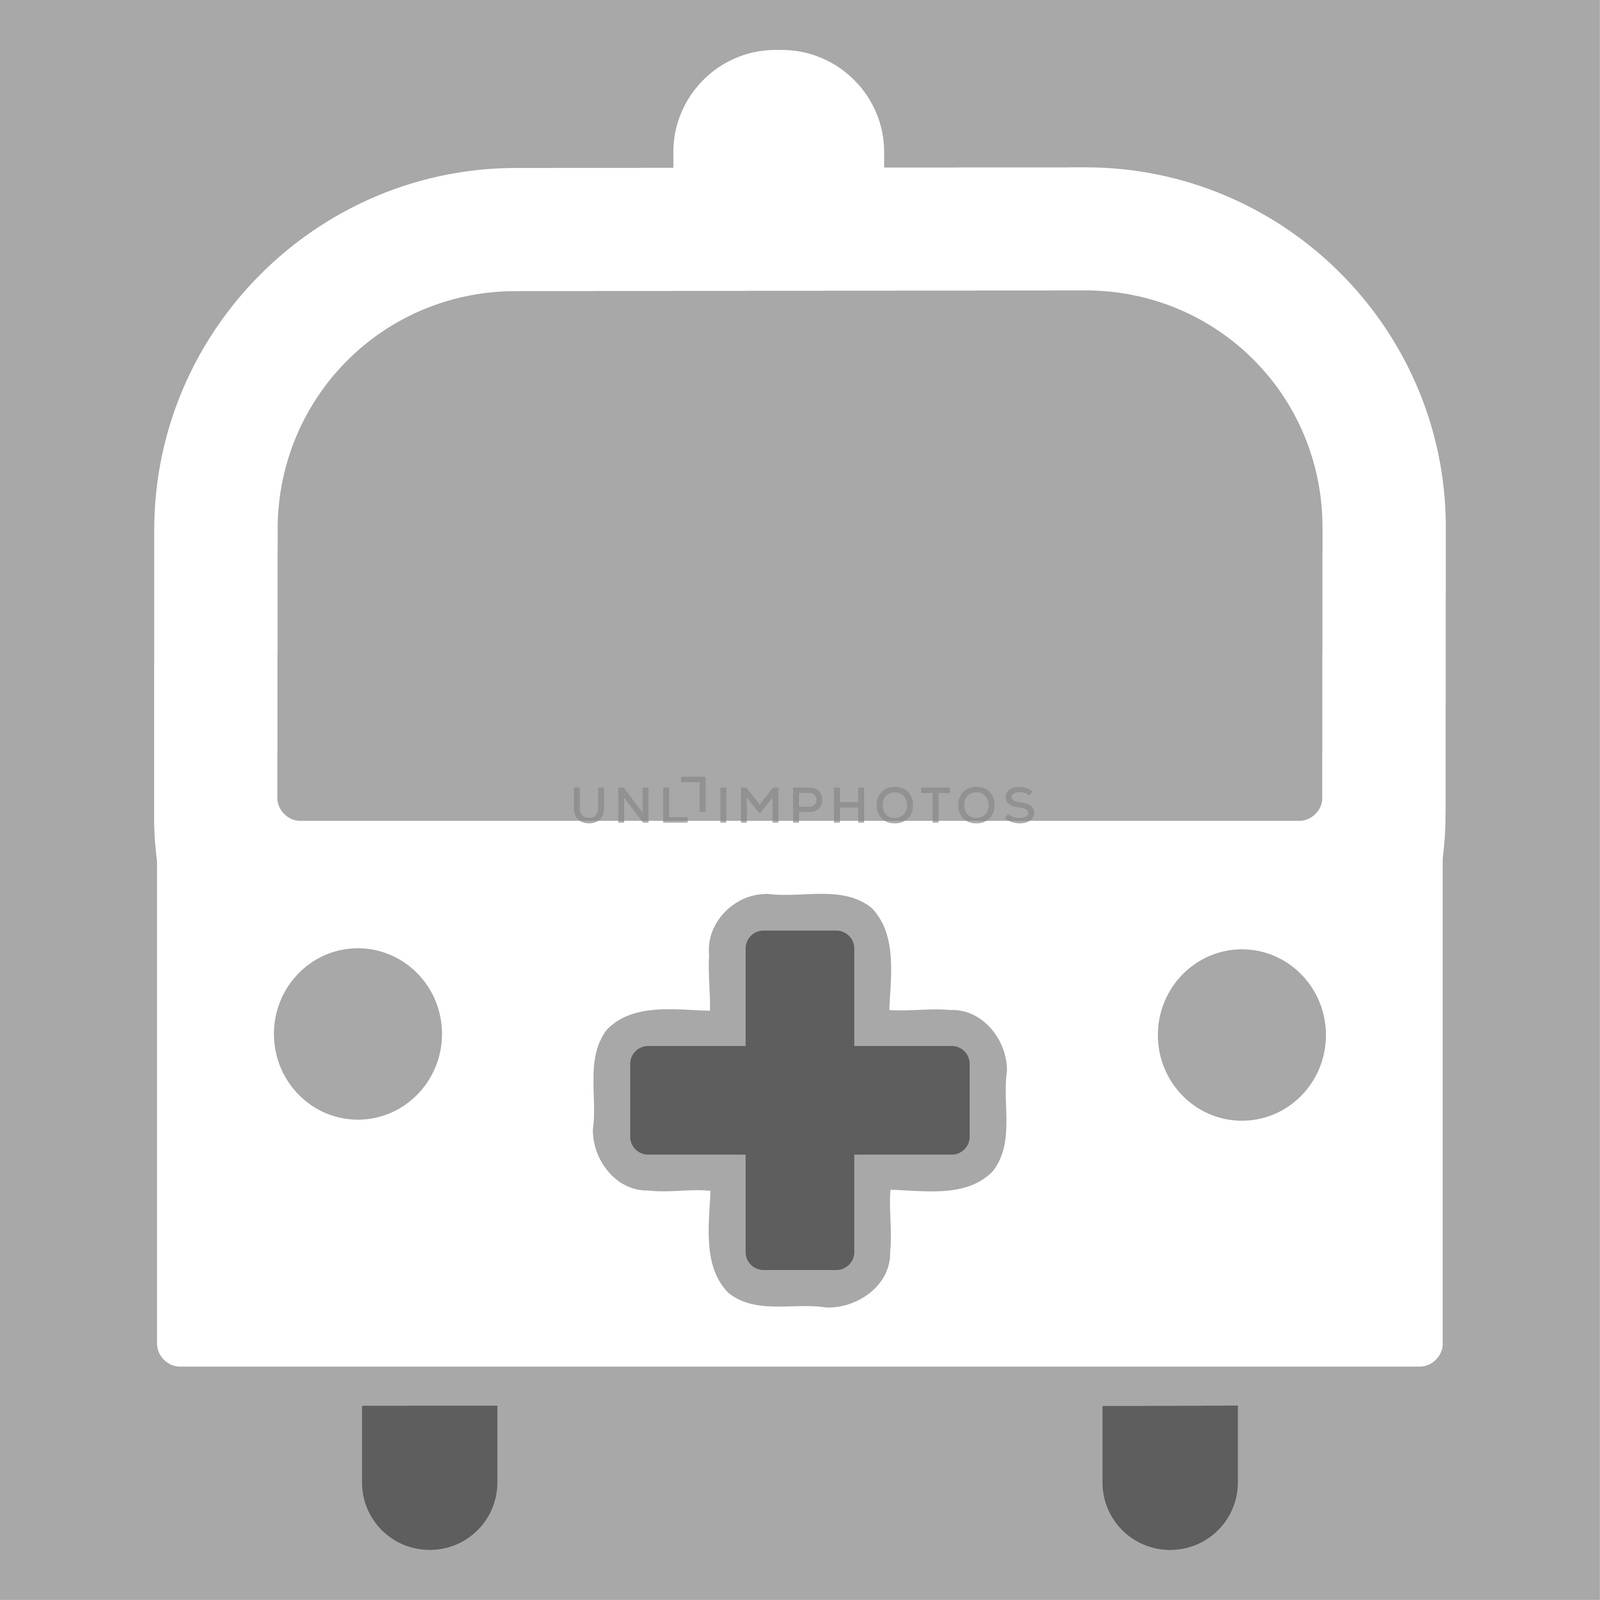 Medical Bus raster icon. Style is bicolor flat symbol, dark gray and white colors, rounded angles, silver background.